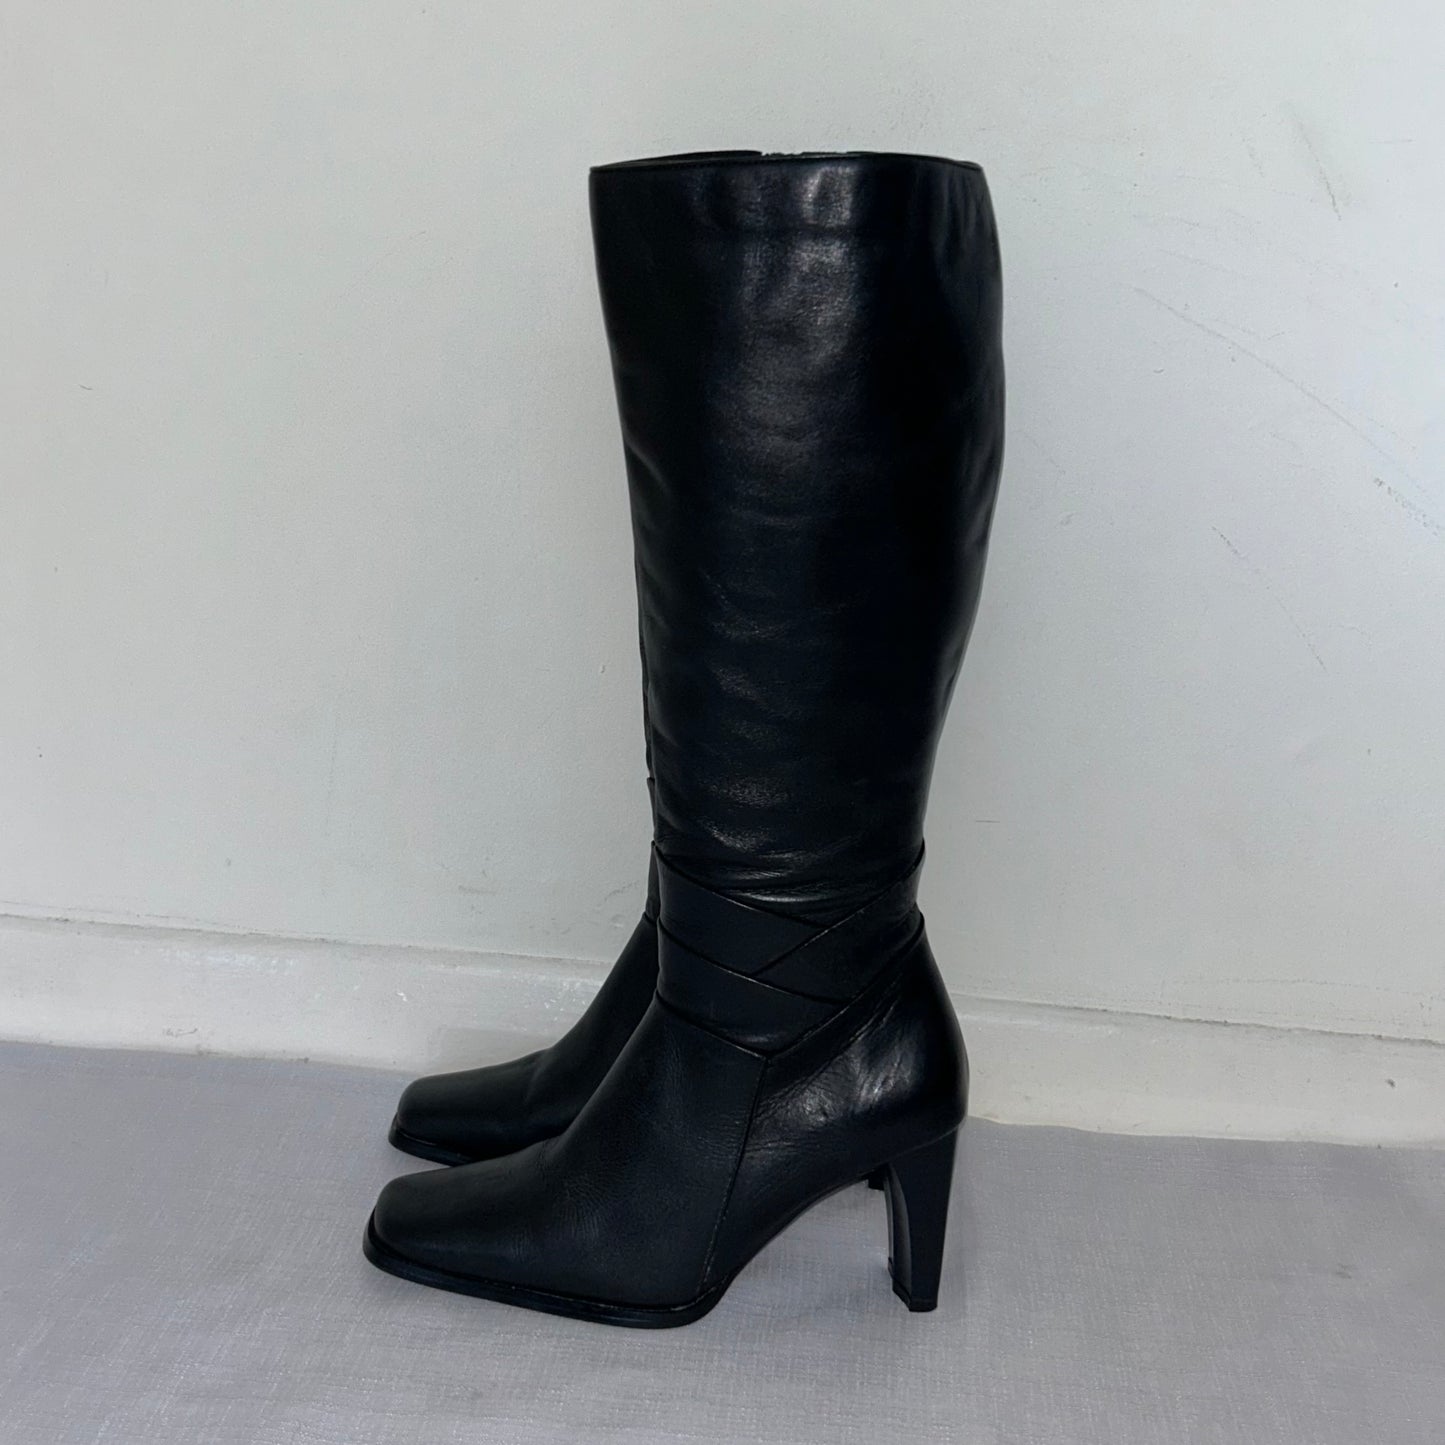 black knee high leather boots on a white background